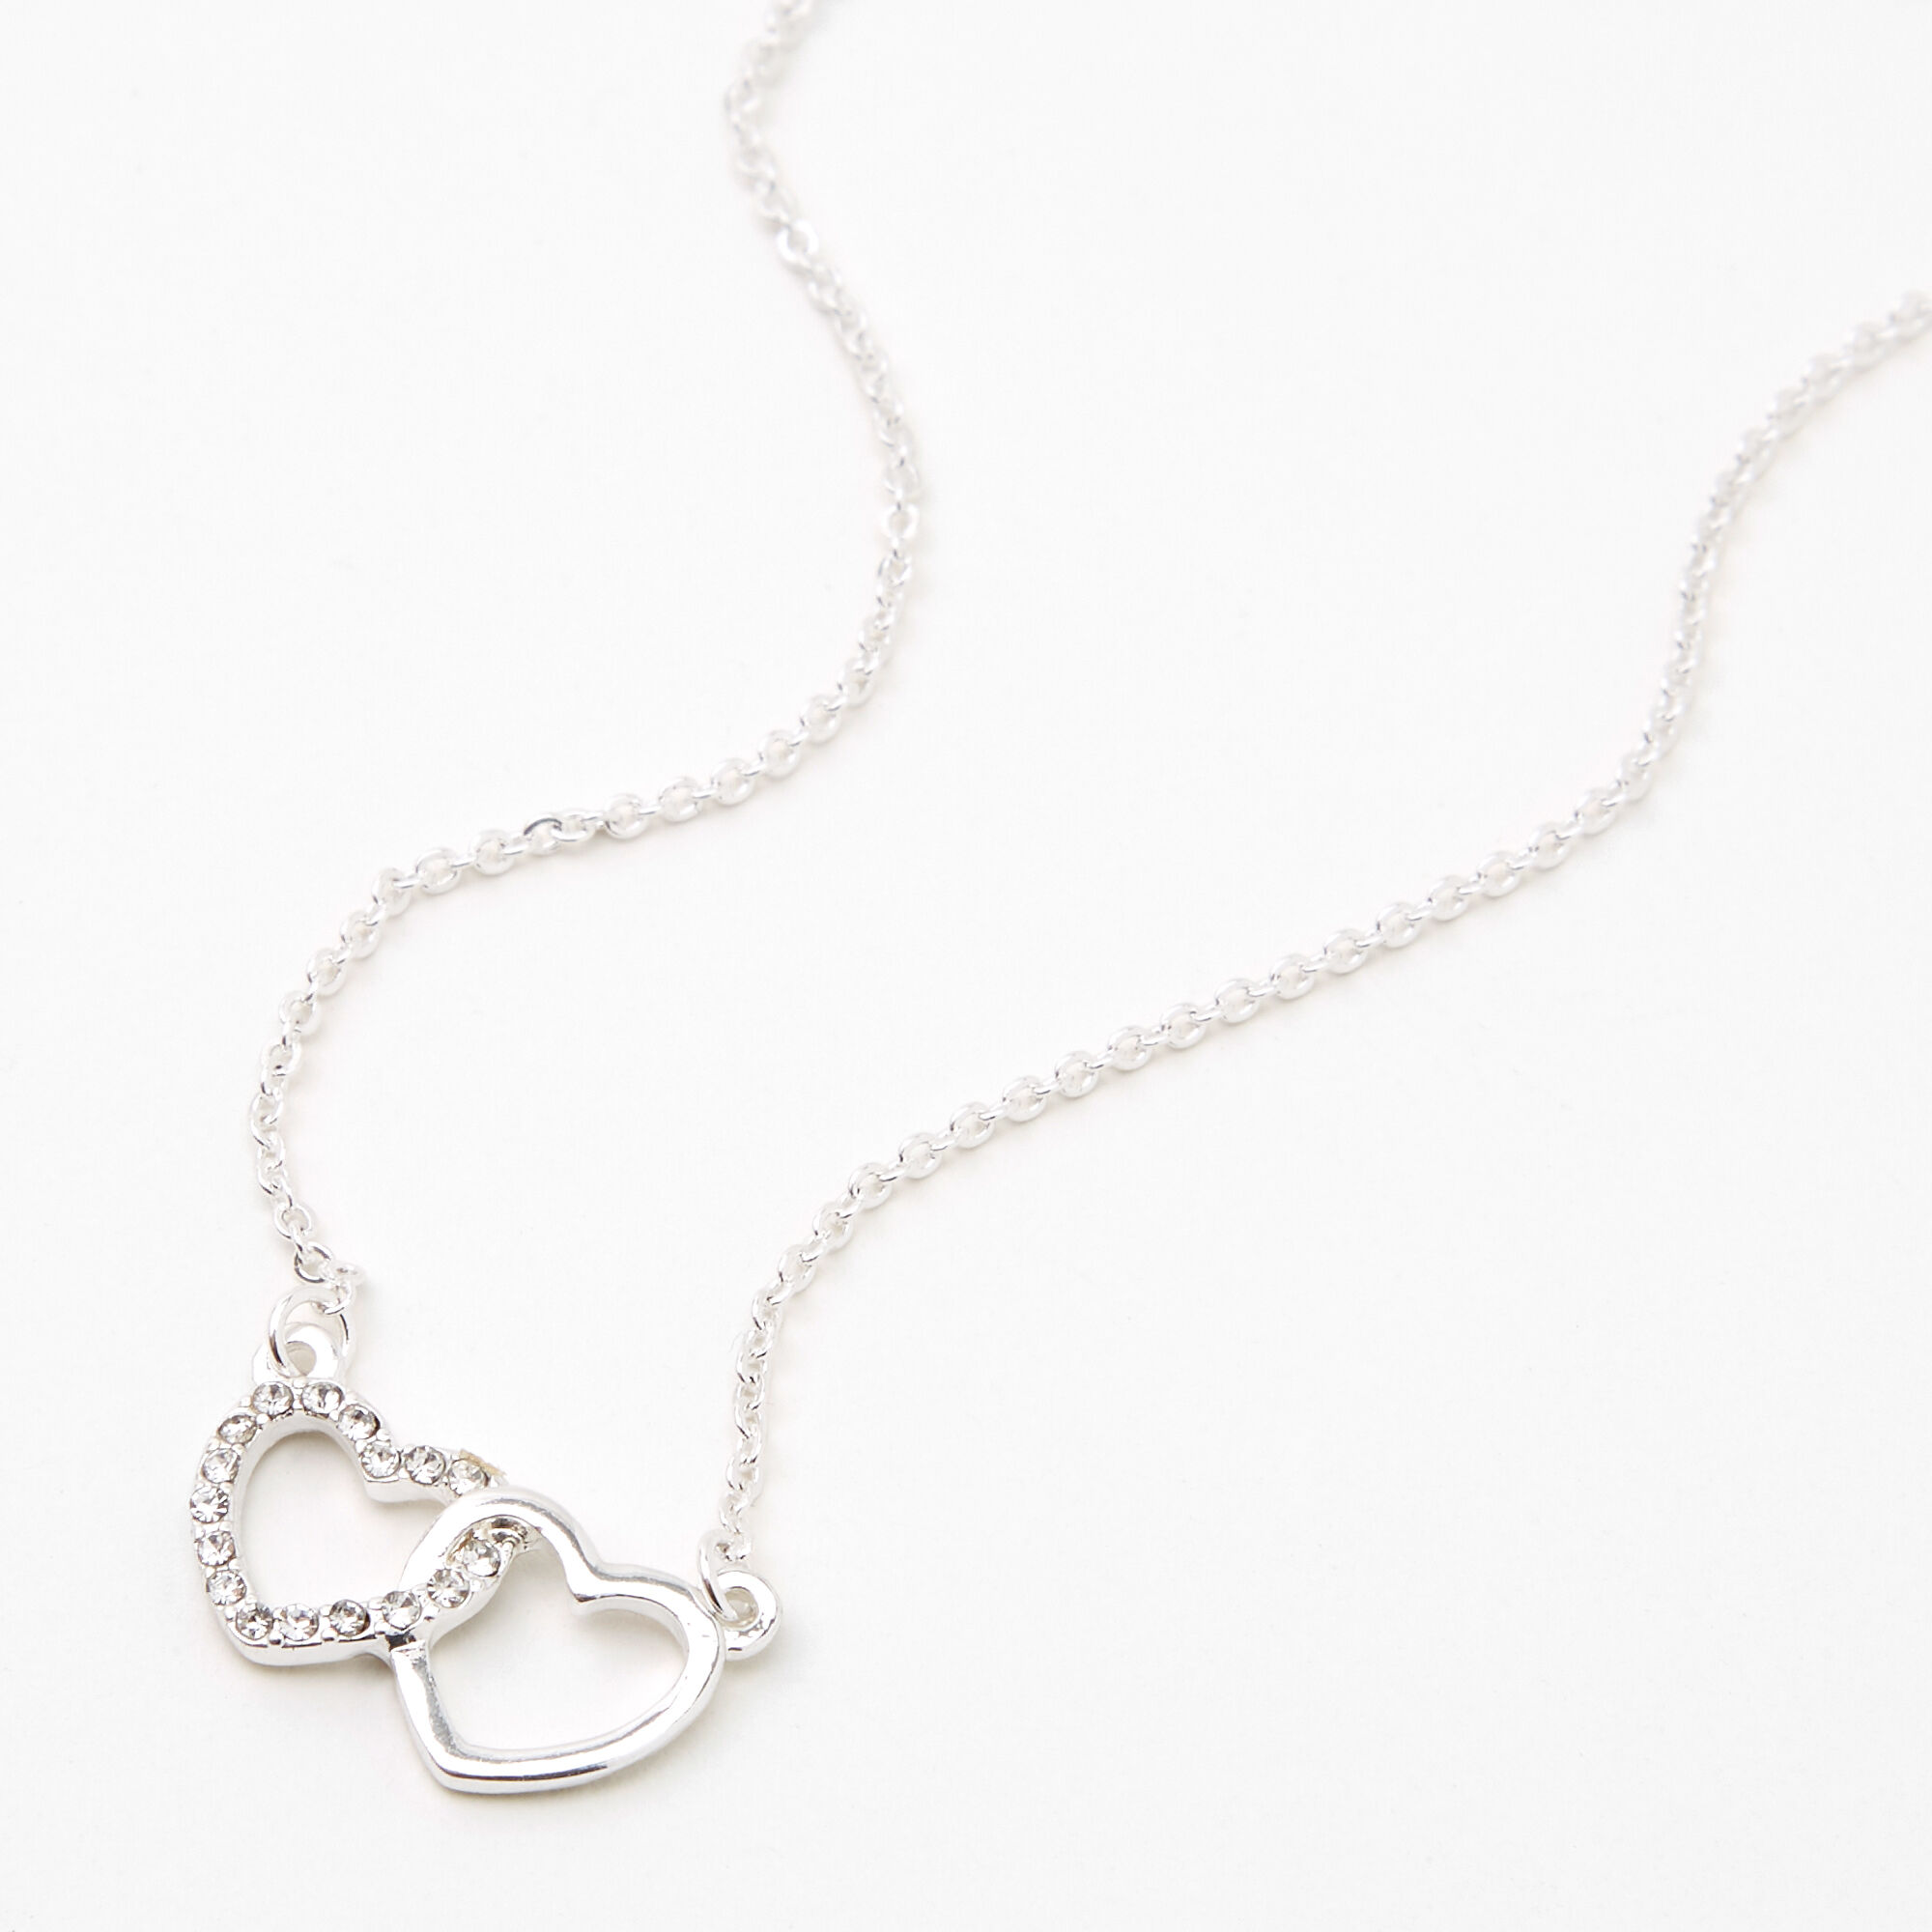 Intertwined Hearts Necklace with Diamonds in Sterling Silver - MYKA